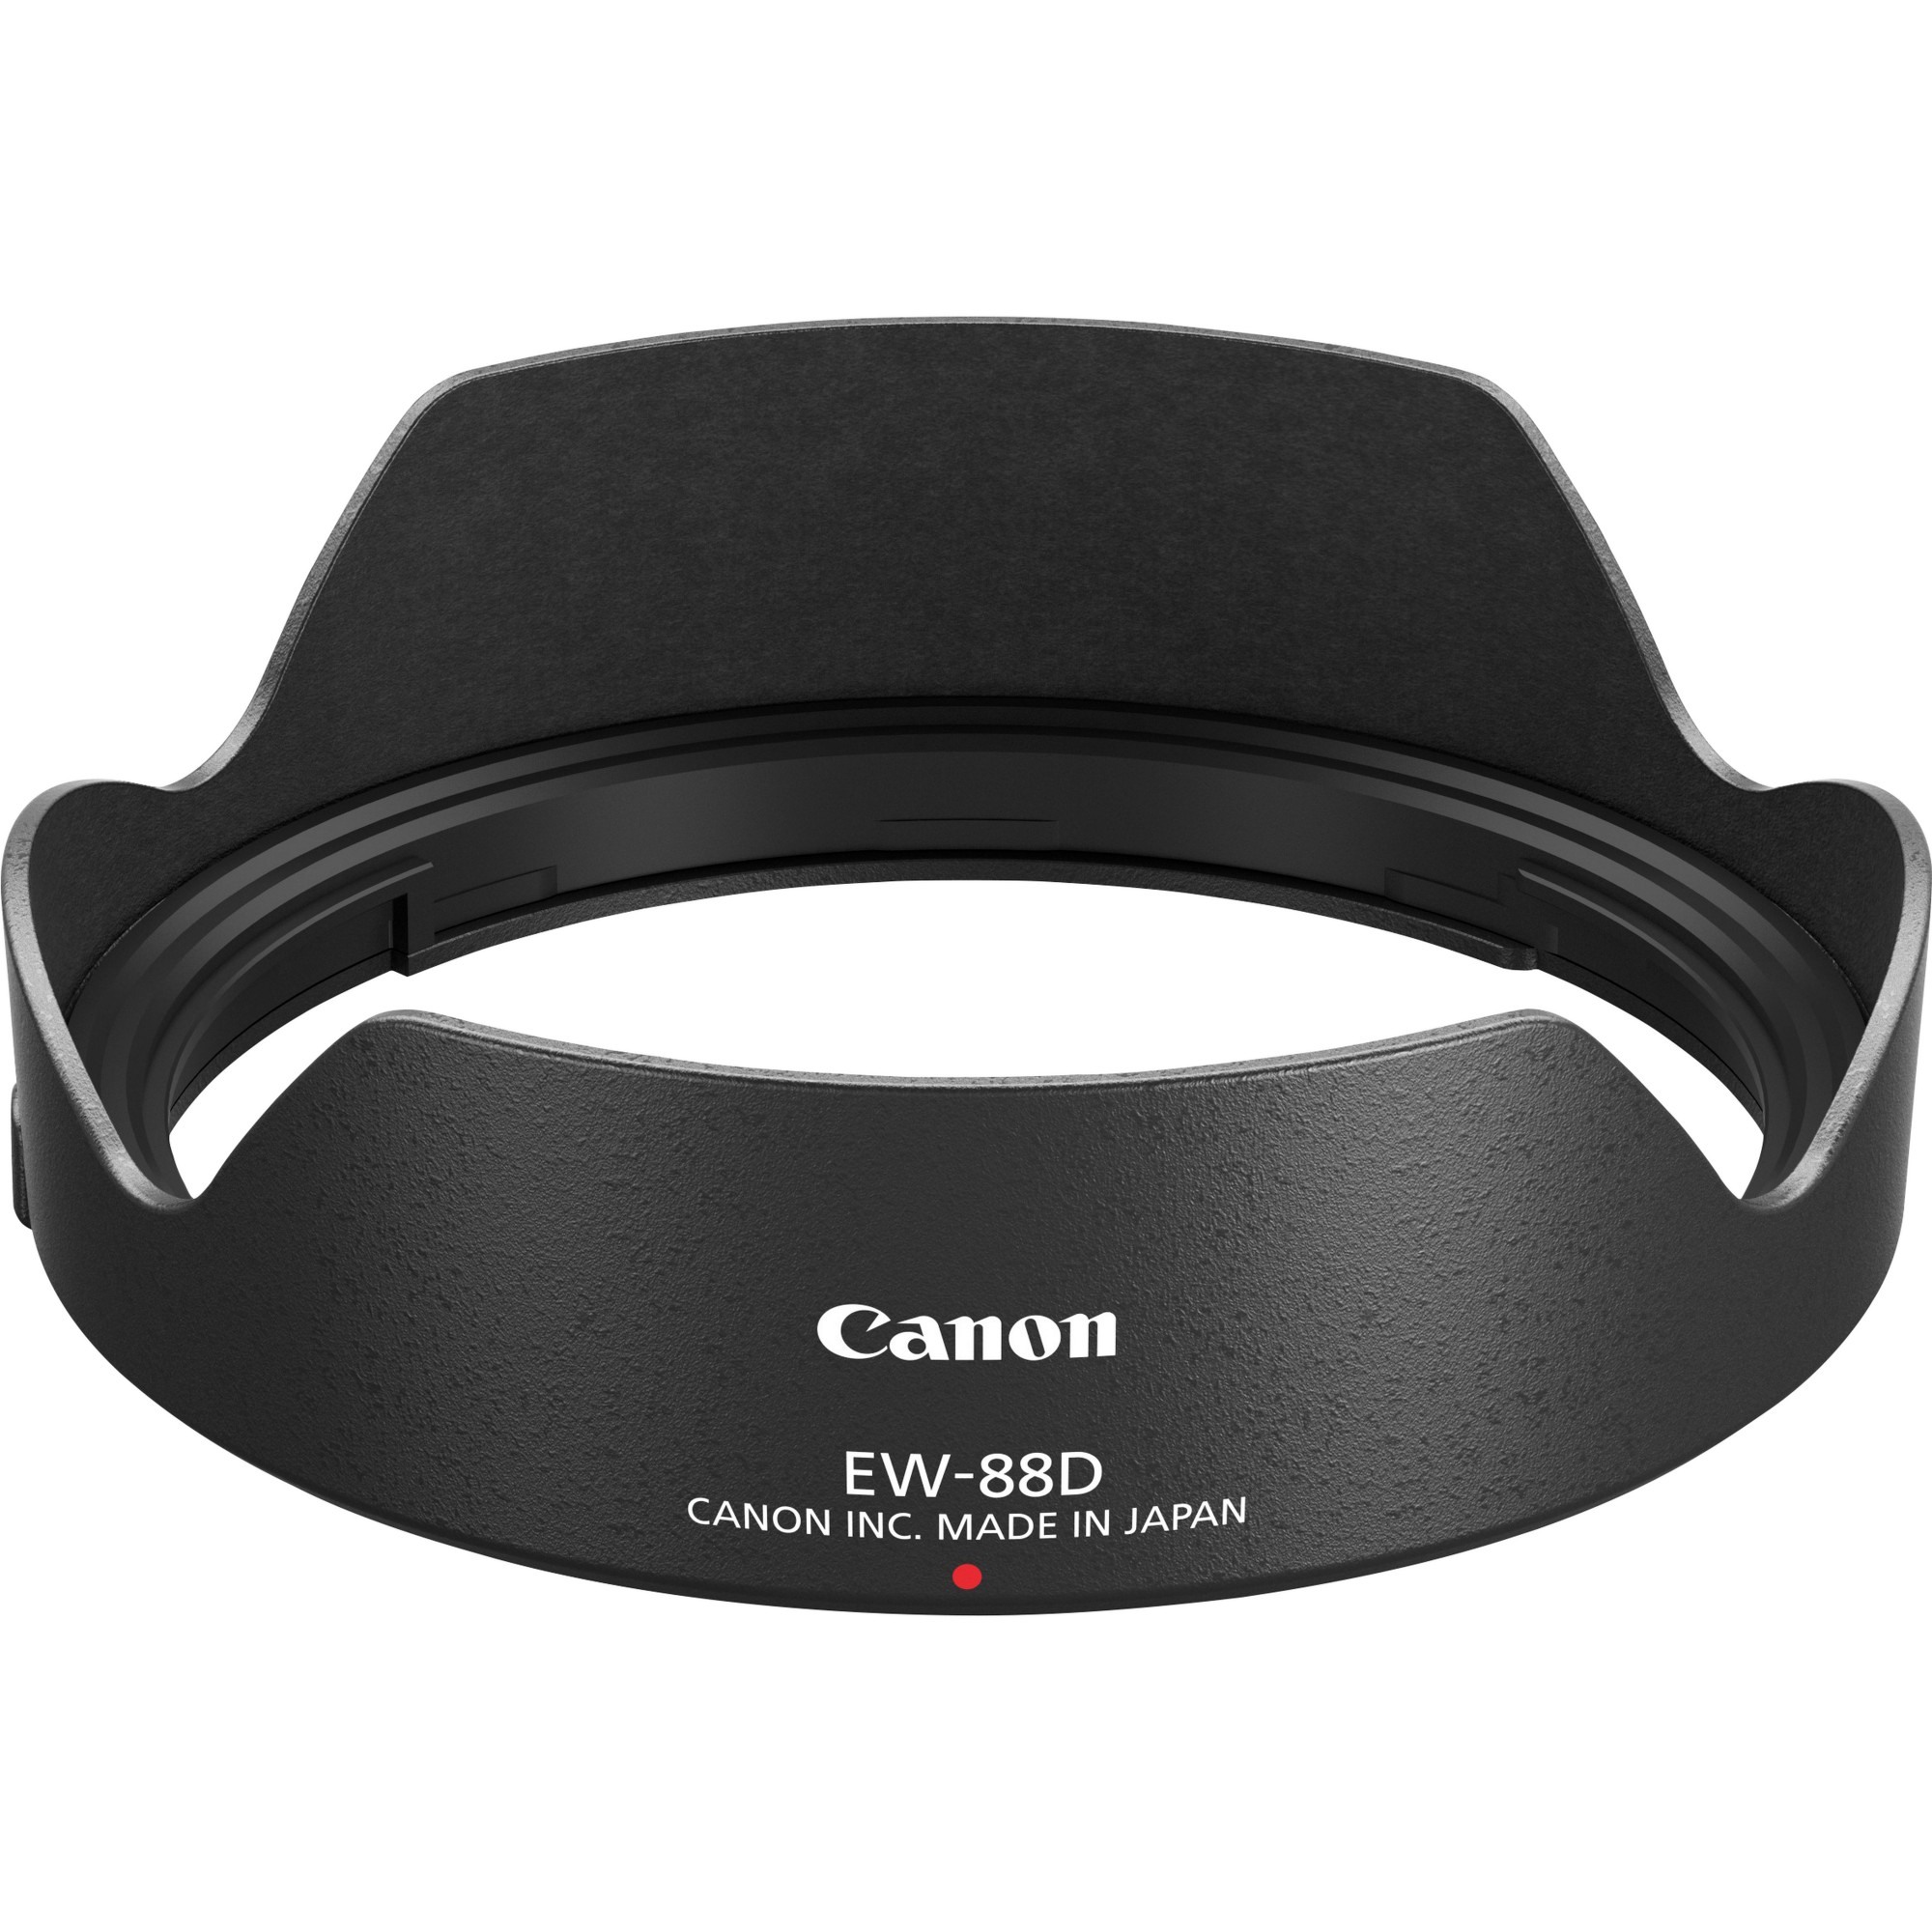 Photos - Other photo accessories Canon 0580C001 lens hood Black 